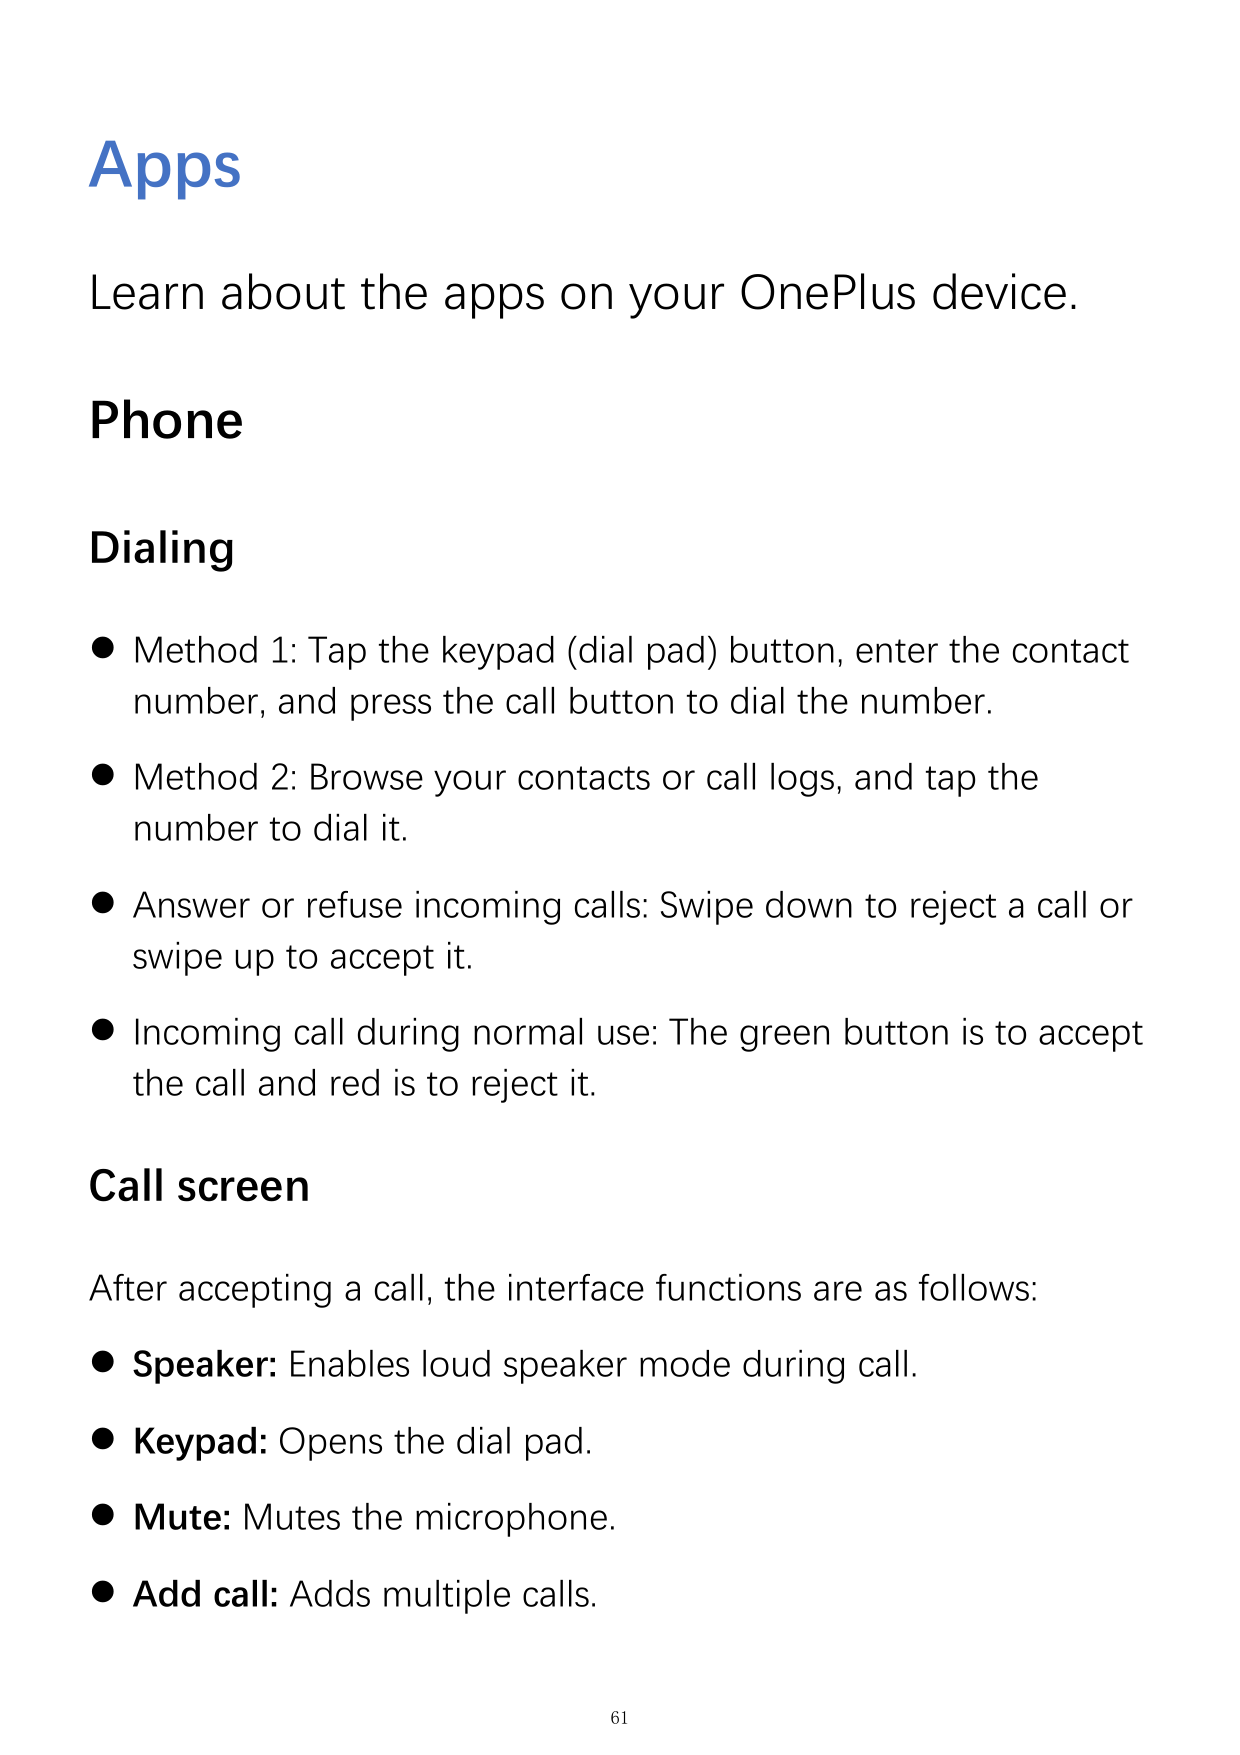 AppsLearn about the apps on your OnePlus device.PhoneDialing Method 1: Tap the keypad (dial pad) button, enter the contactnumbe